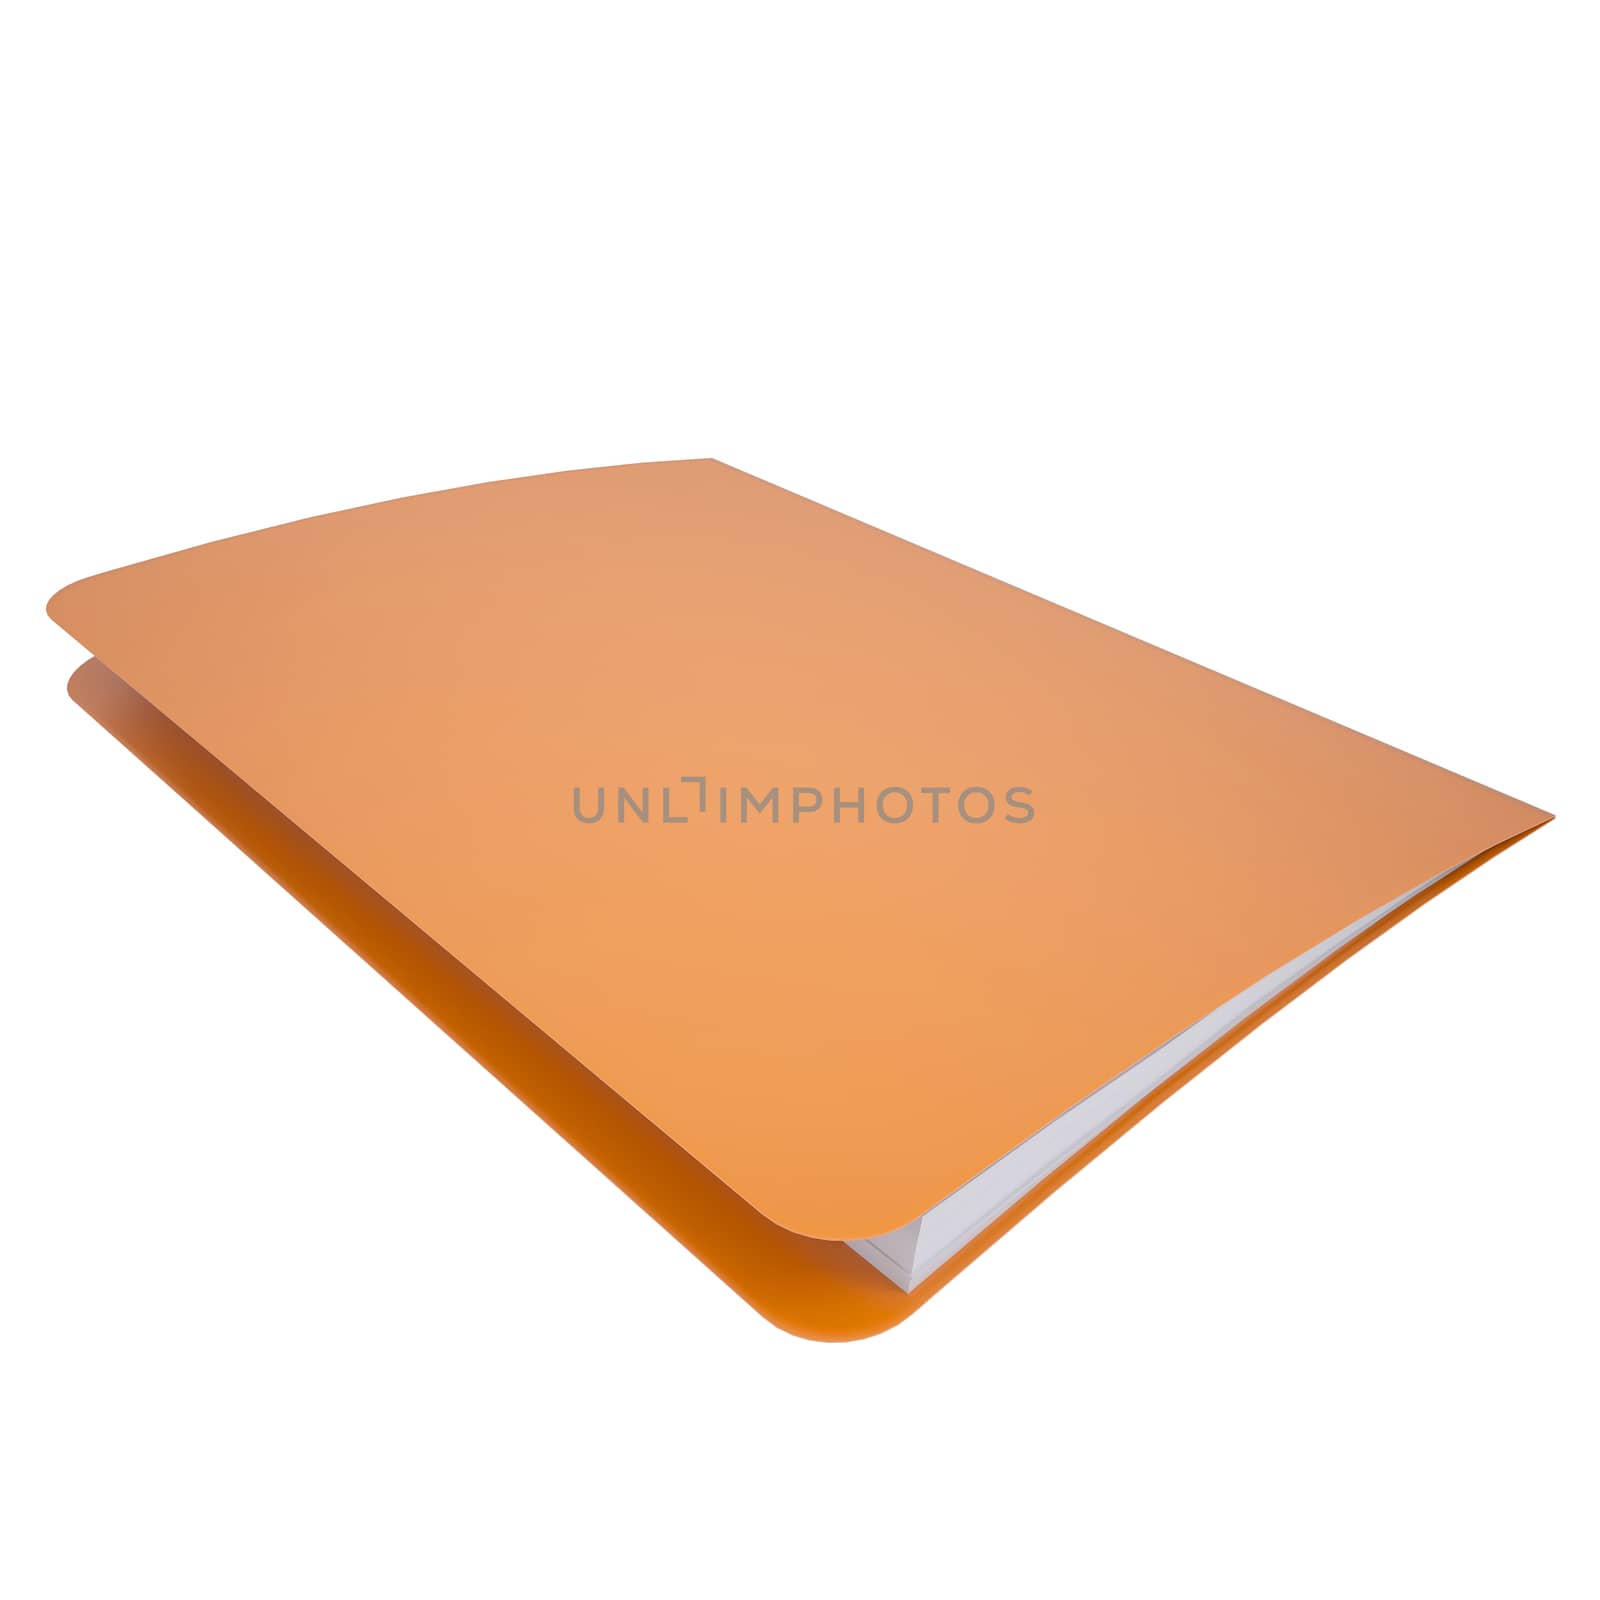 Office folder. Isolated render on a white background